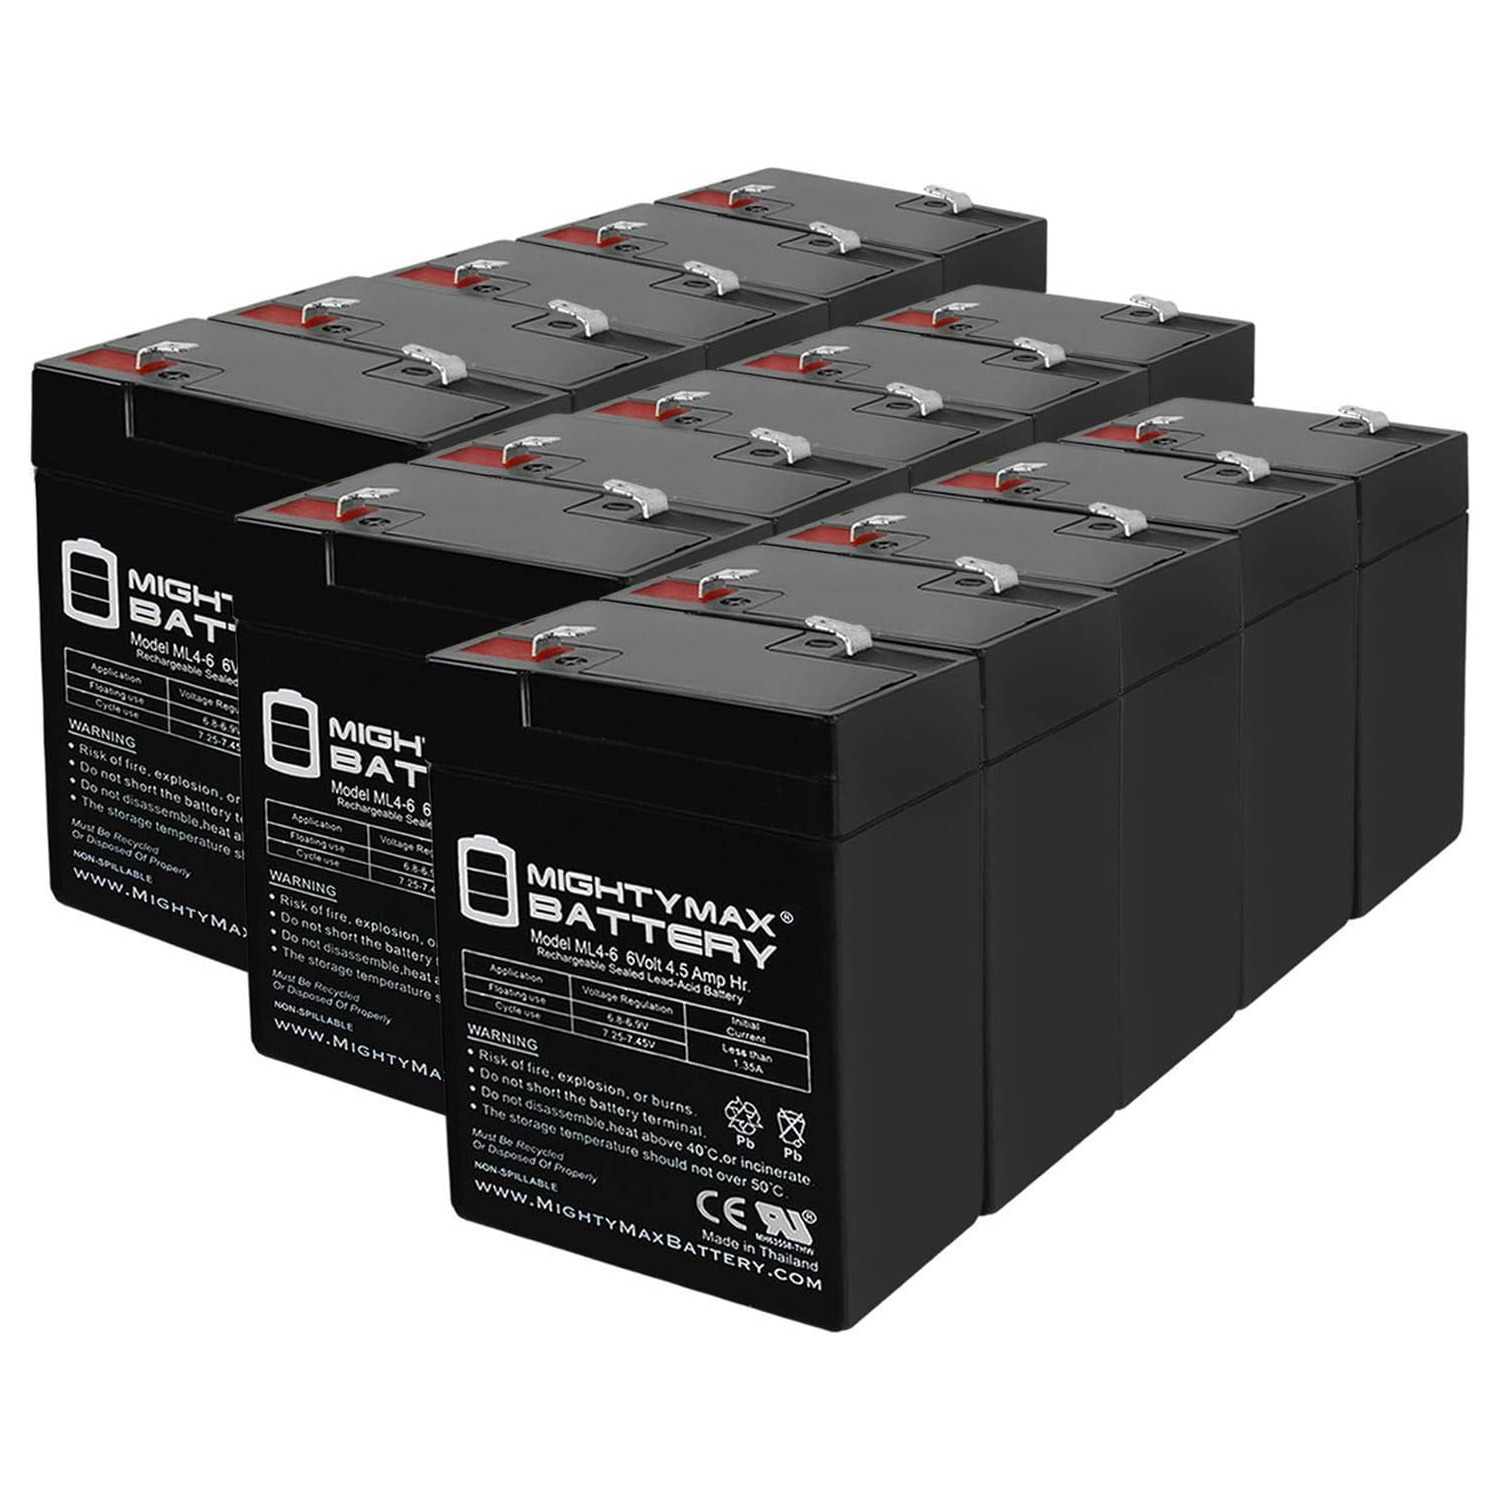 ML4-6 - 6V 4.5AH Replaces APC 200DL Battery - 15 Pack